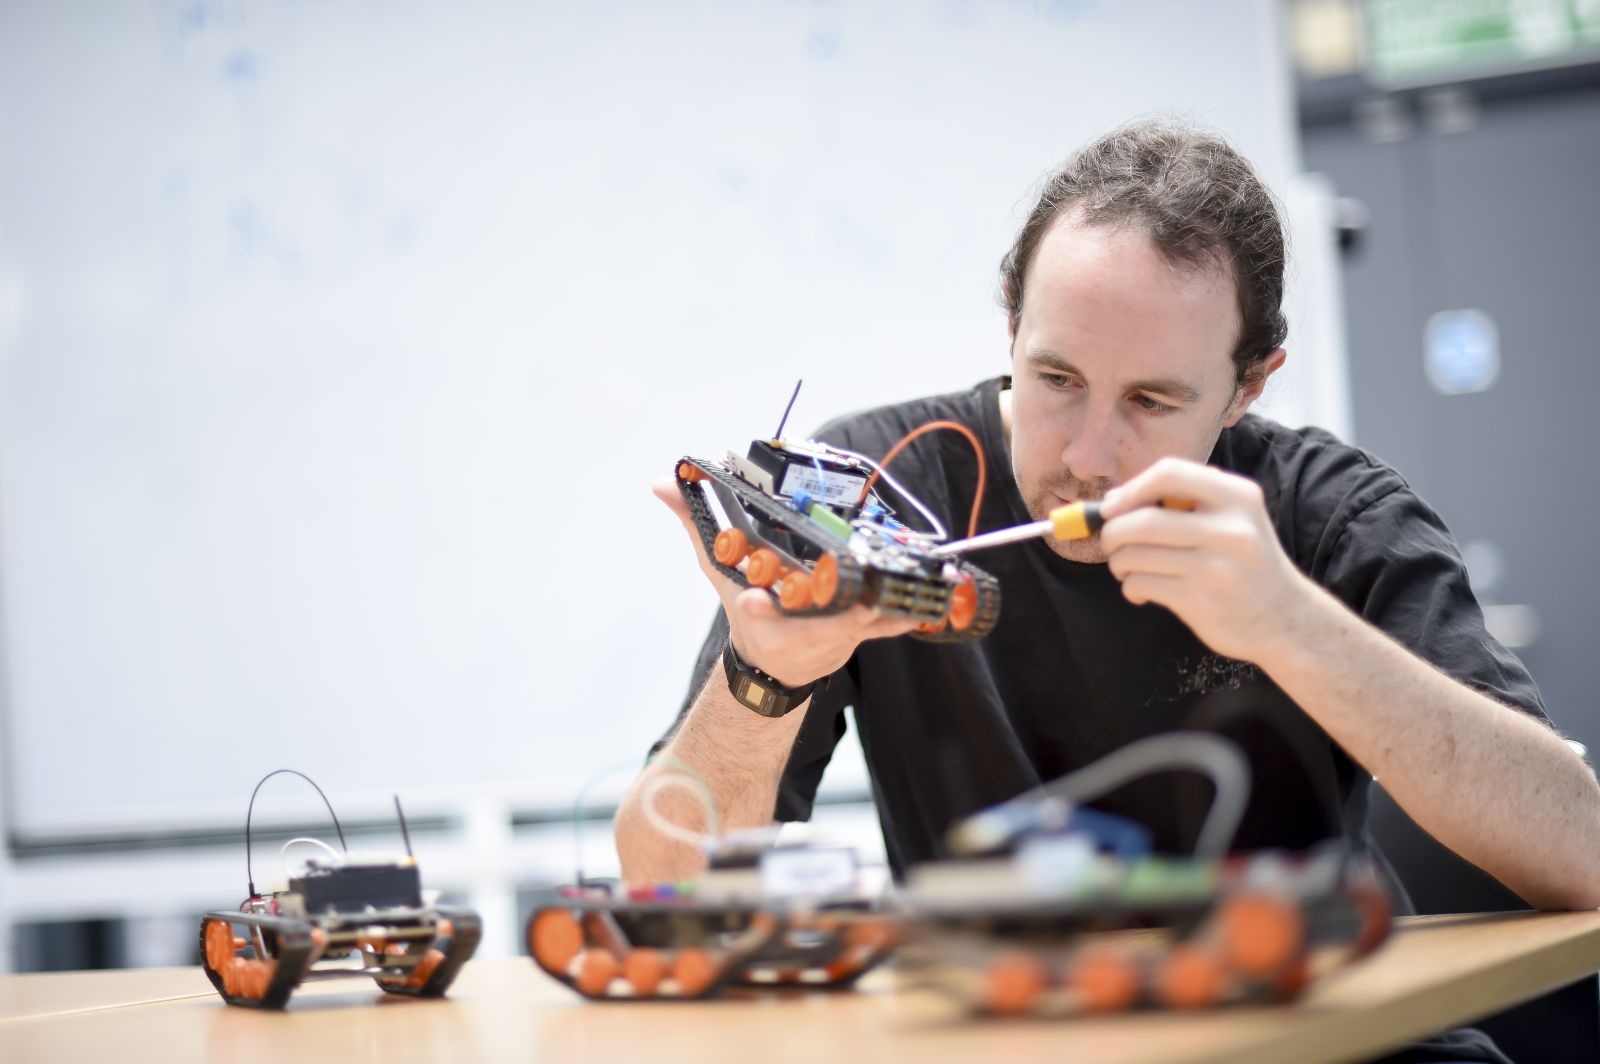 A PhD student works on mini-robots for his robotics project at the Ƶ